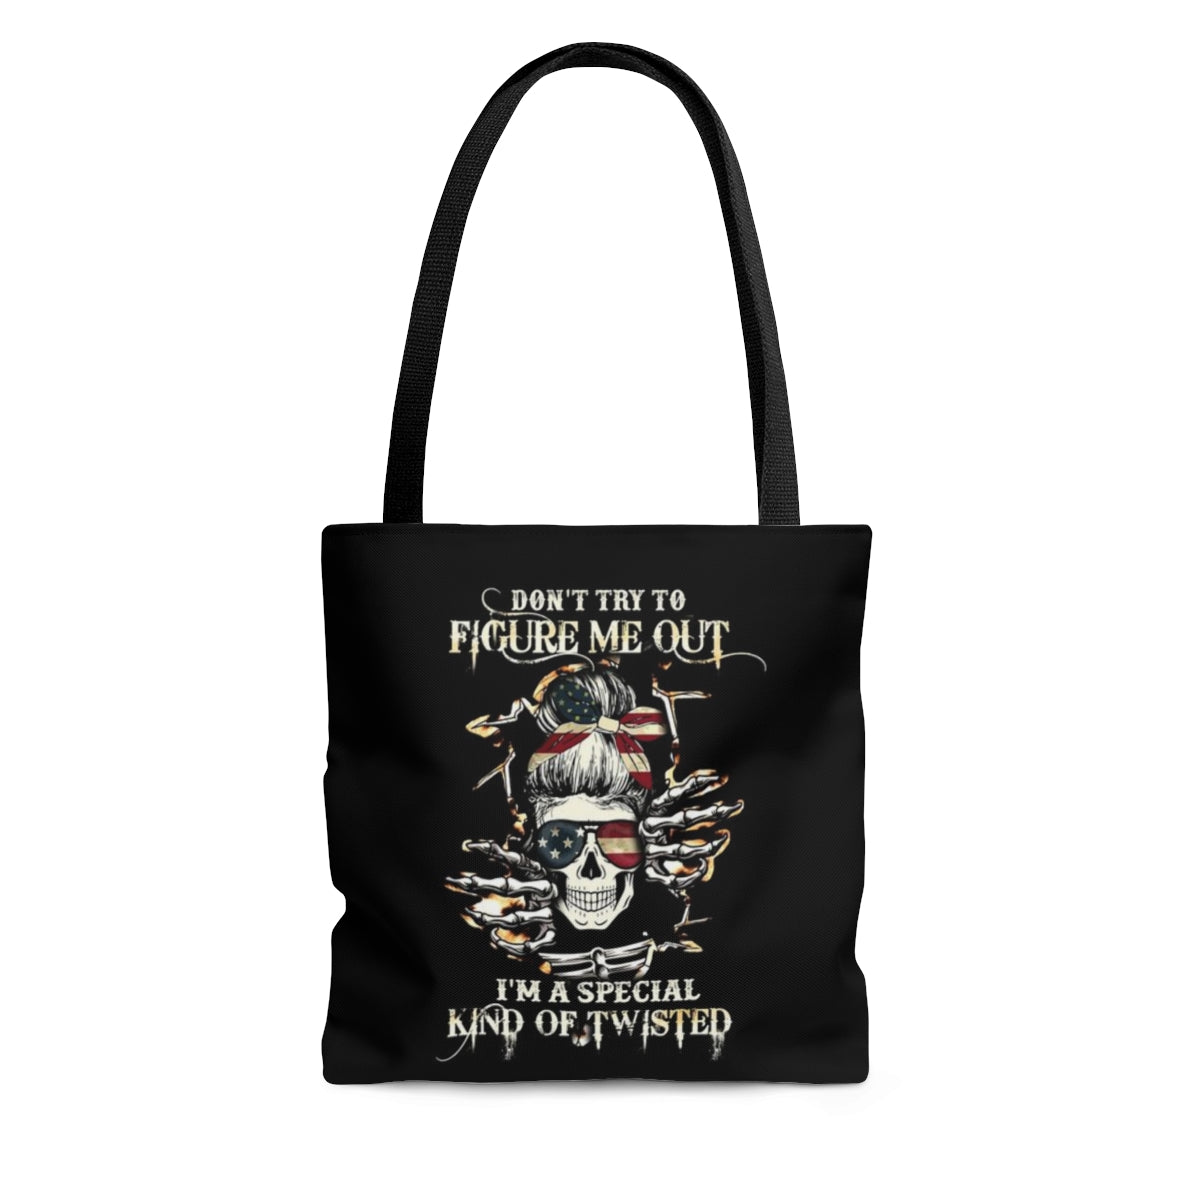 DON'T TRY TO FIGURE ME OUT TOTE BAG - TLTW2611221